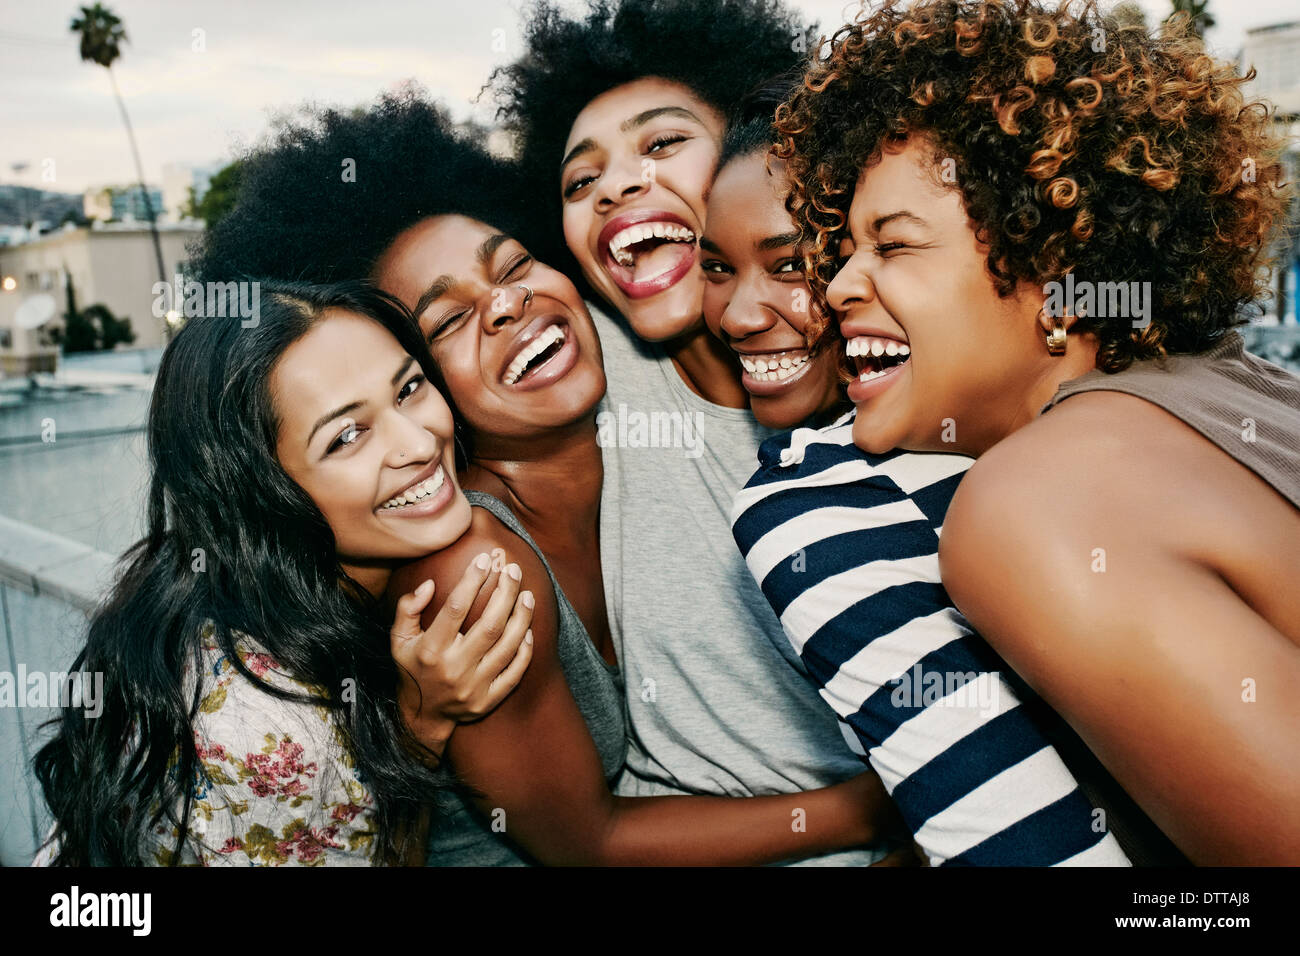 Women laughing together on urban rooftop Stock Photo